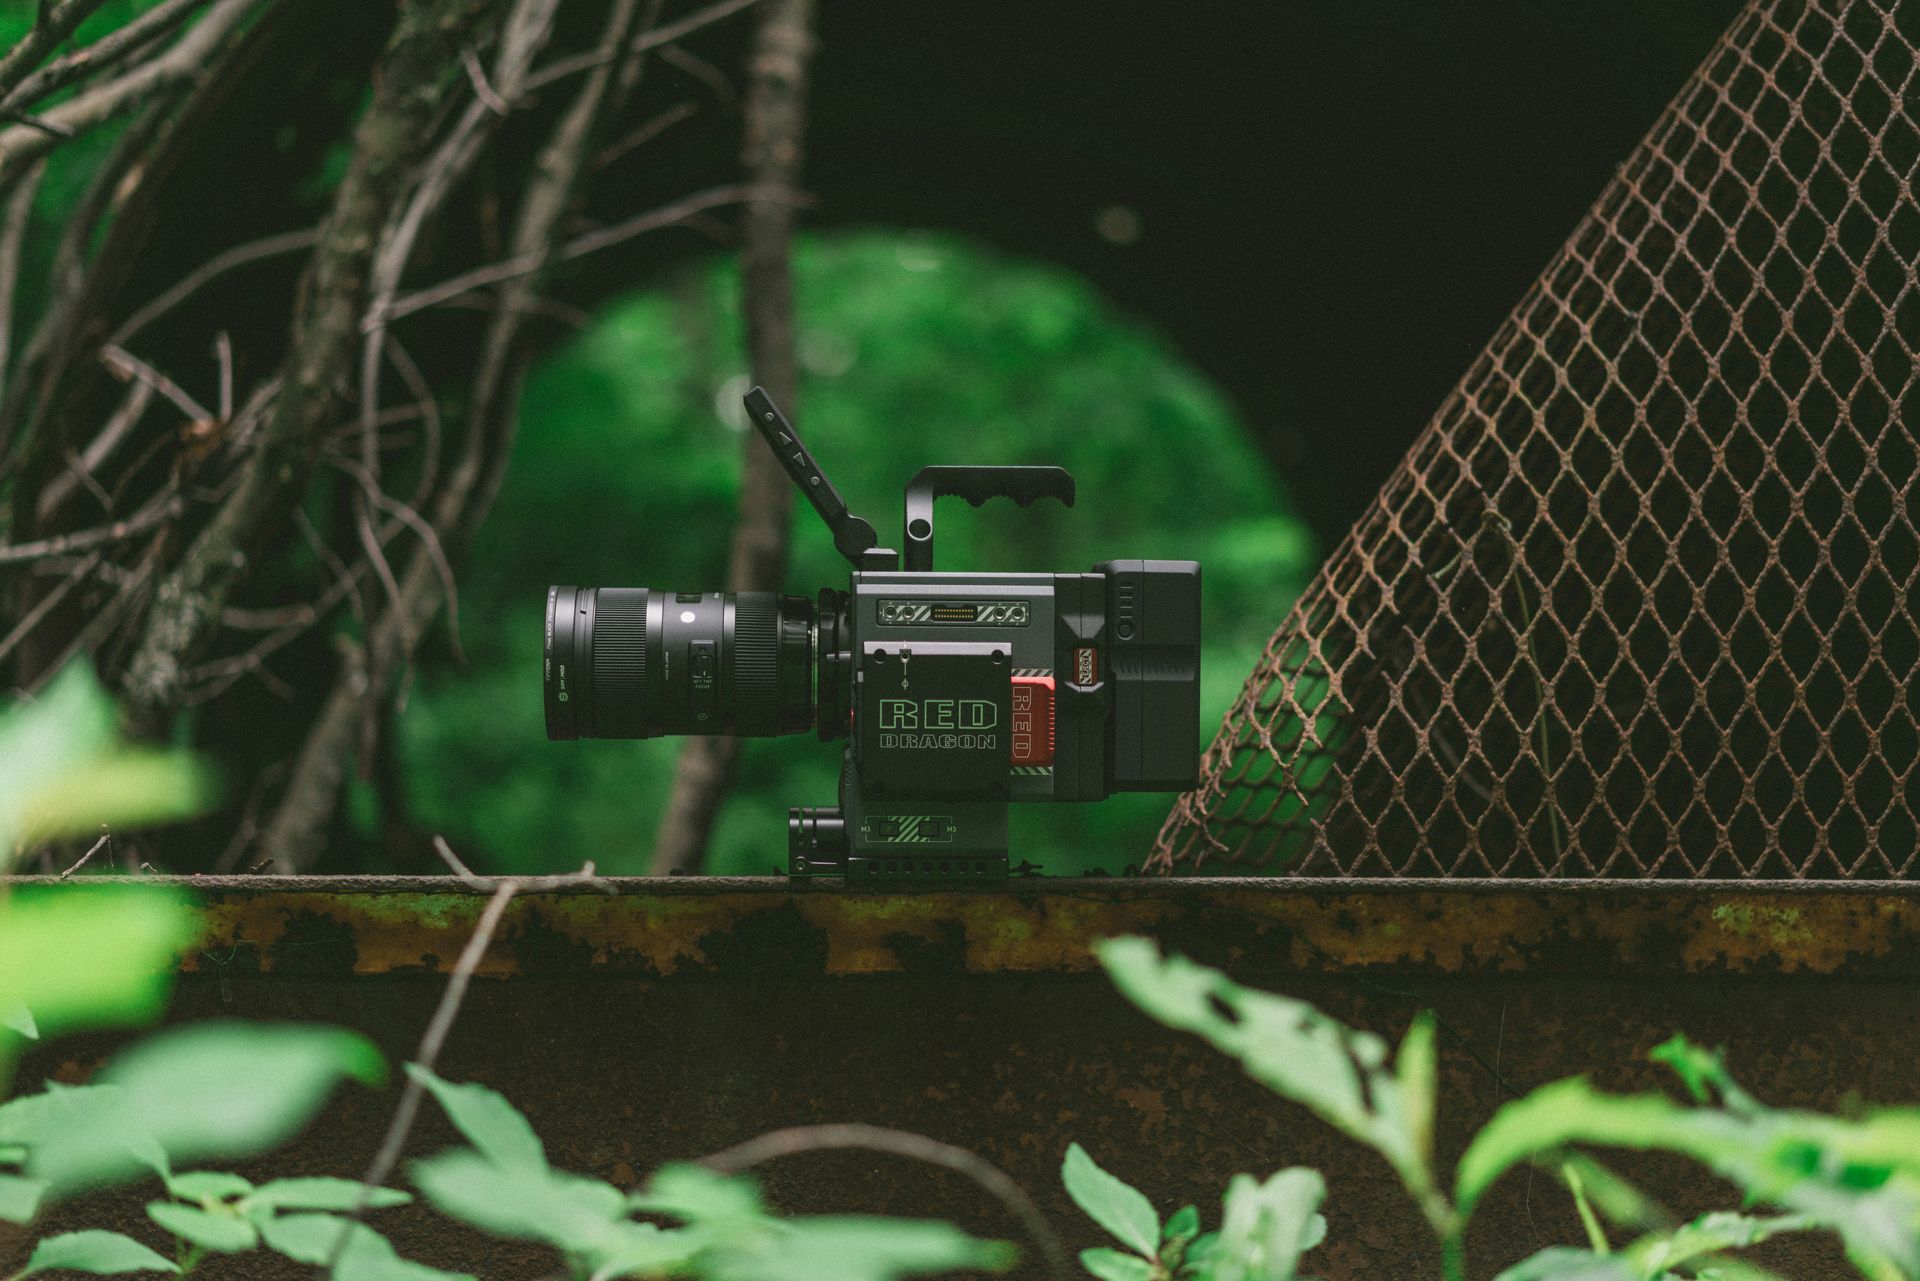 RED cinema camera sitting in forest